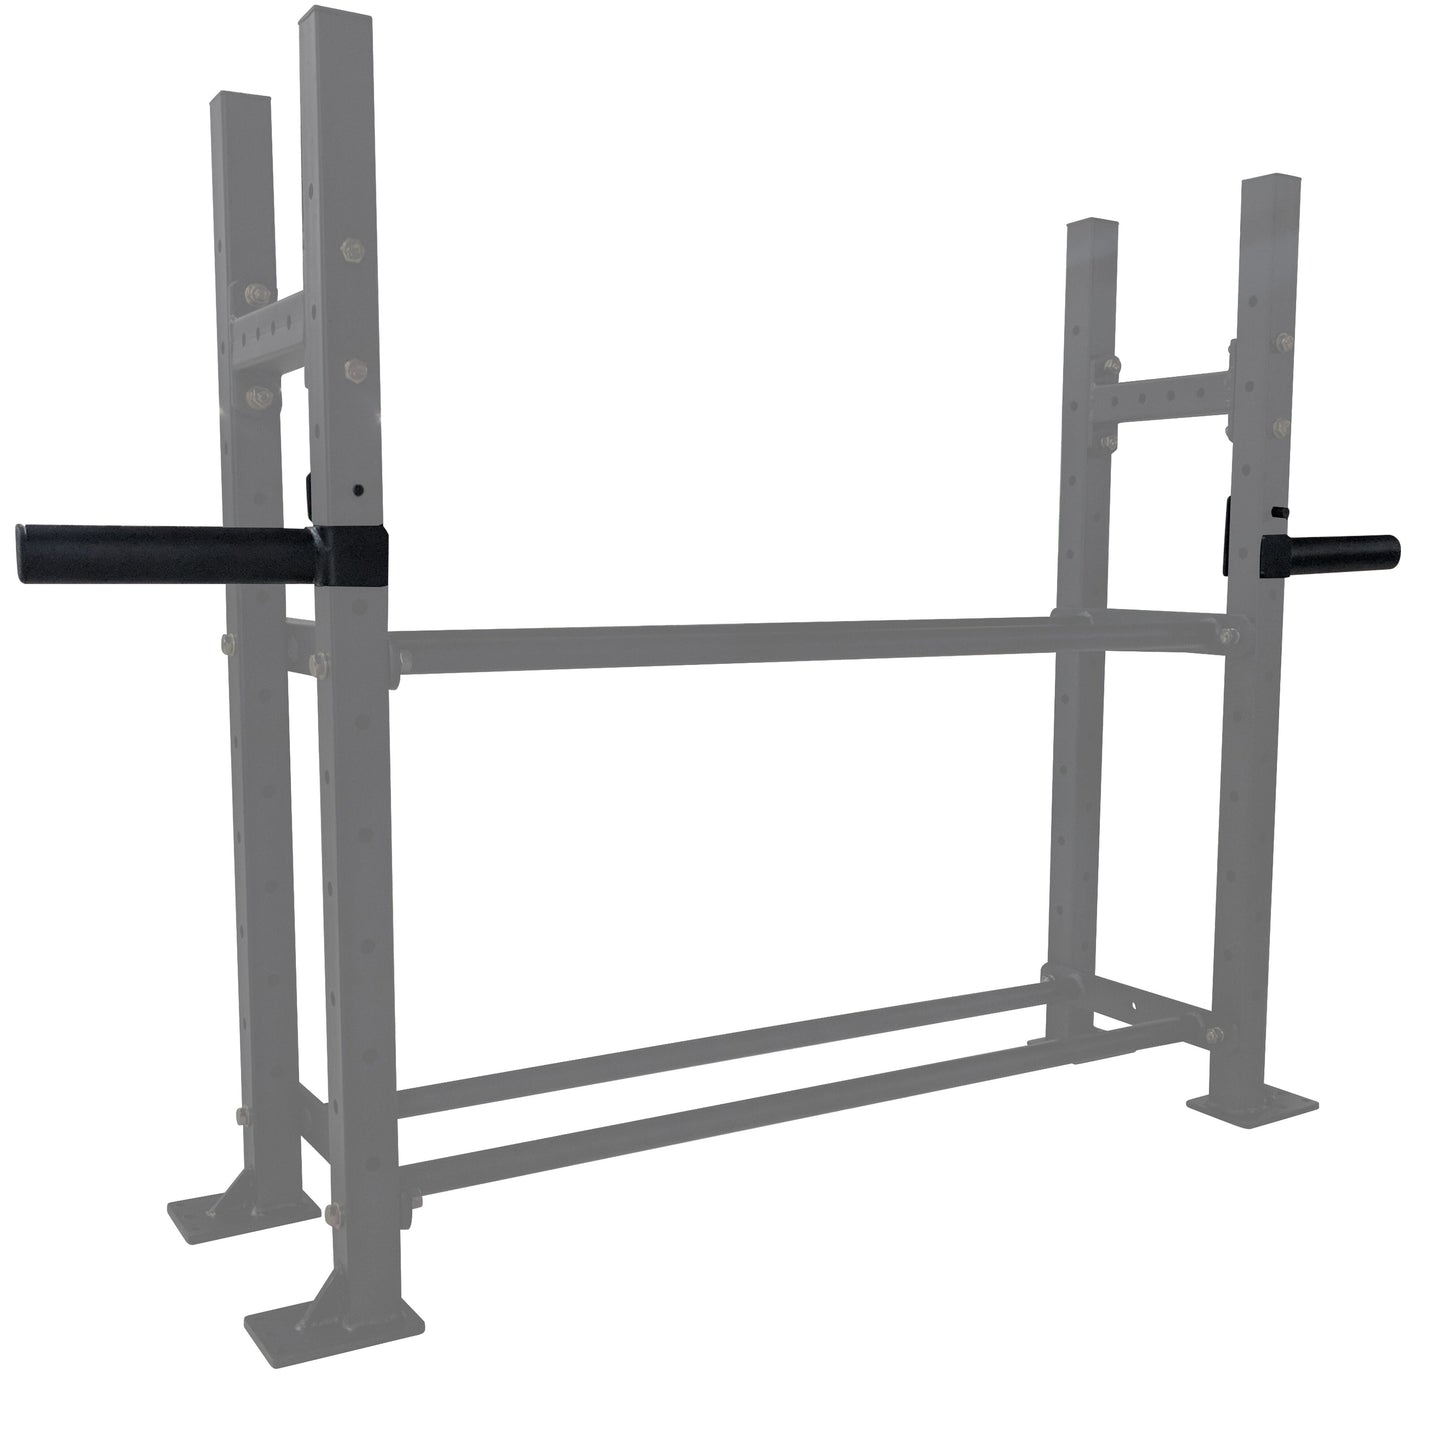 Weight Plate Holders for Mass Storage System - view 2